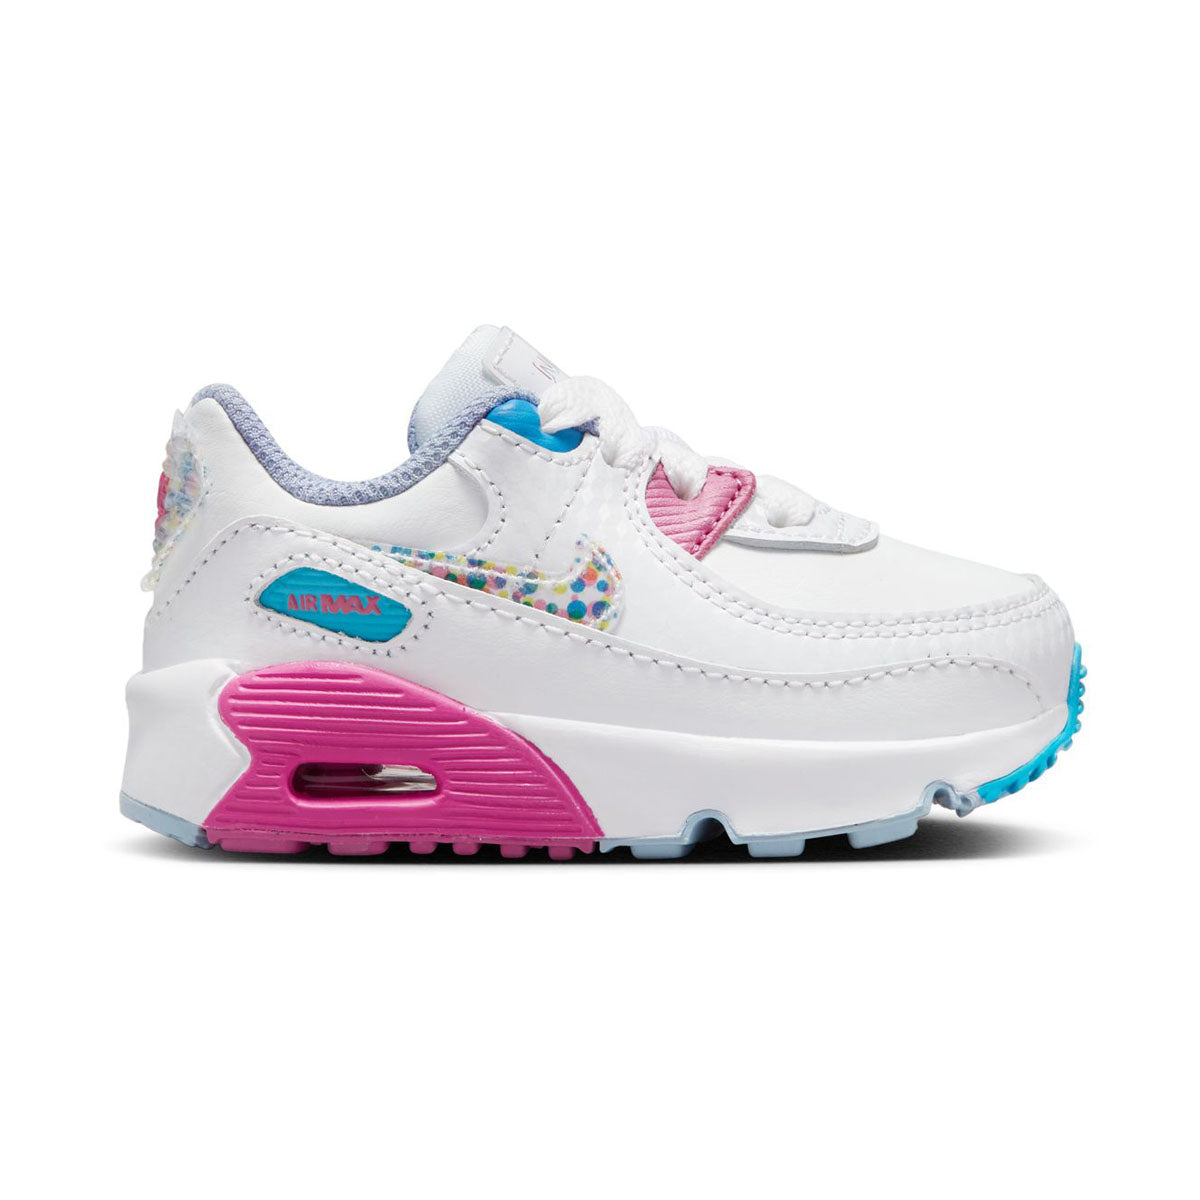 Nike Air Max 90 LTR SE Baby/Toddler Shoes | Millennium Shoes